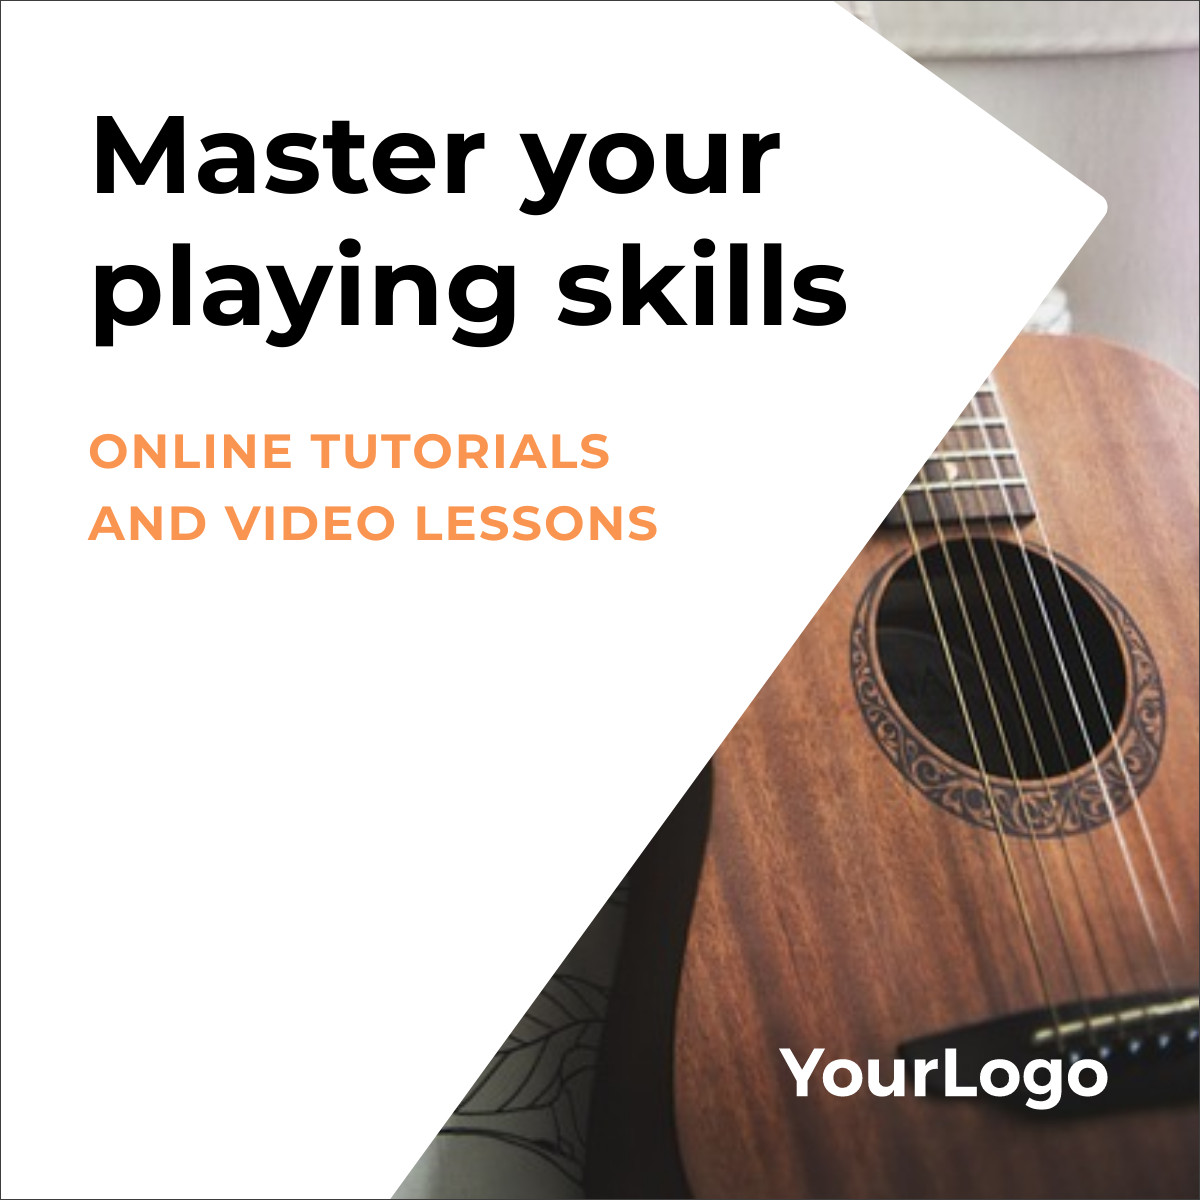 Master Your Playing Skills Online Tutorials